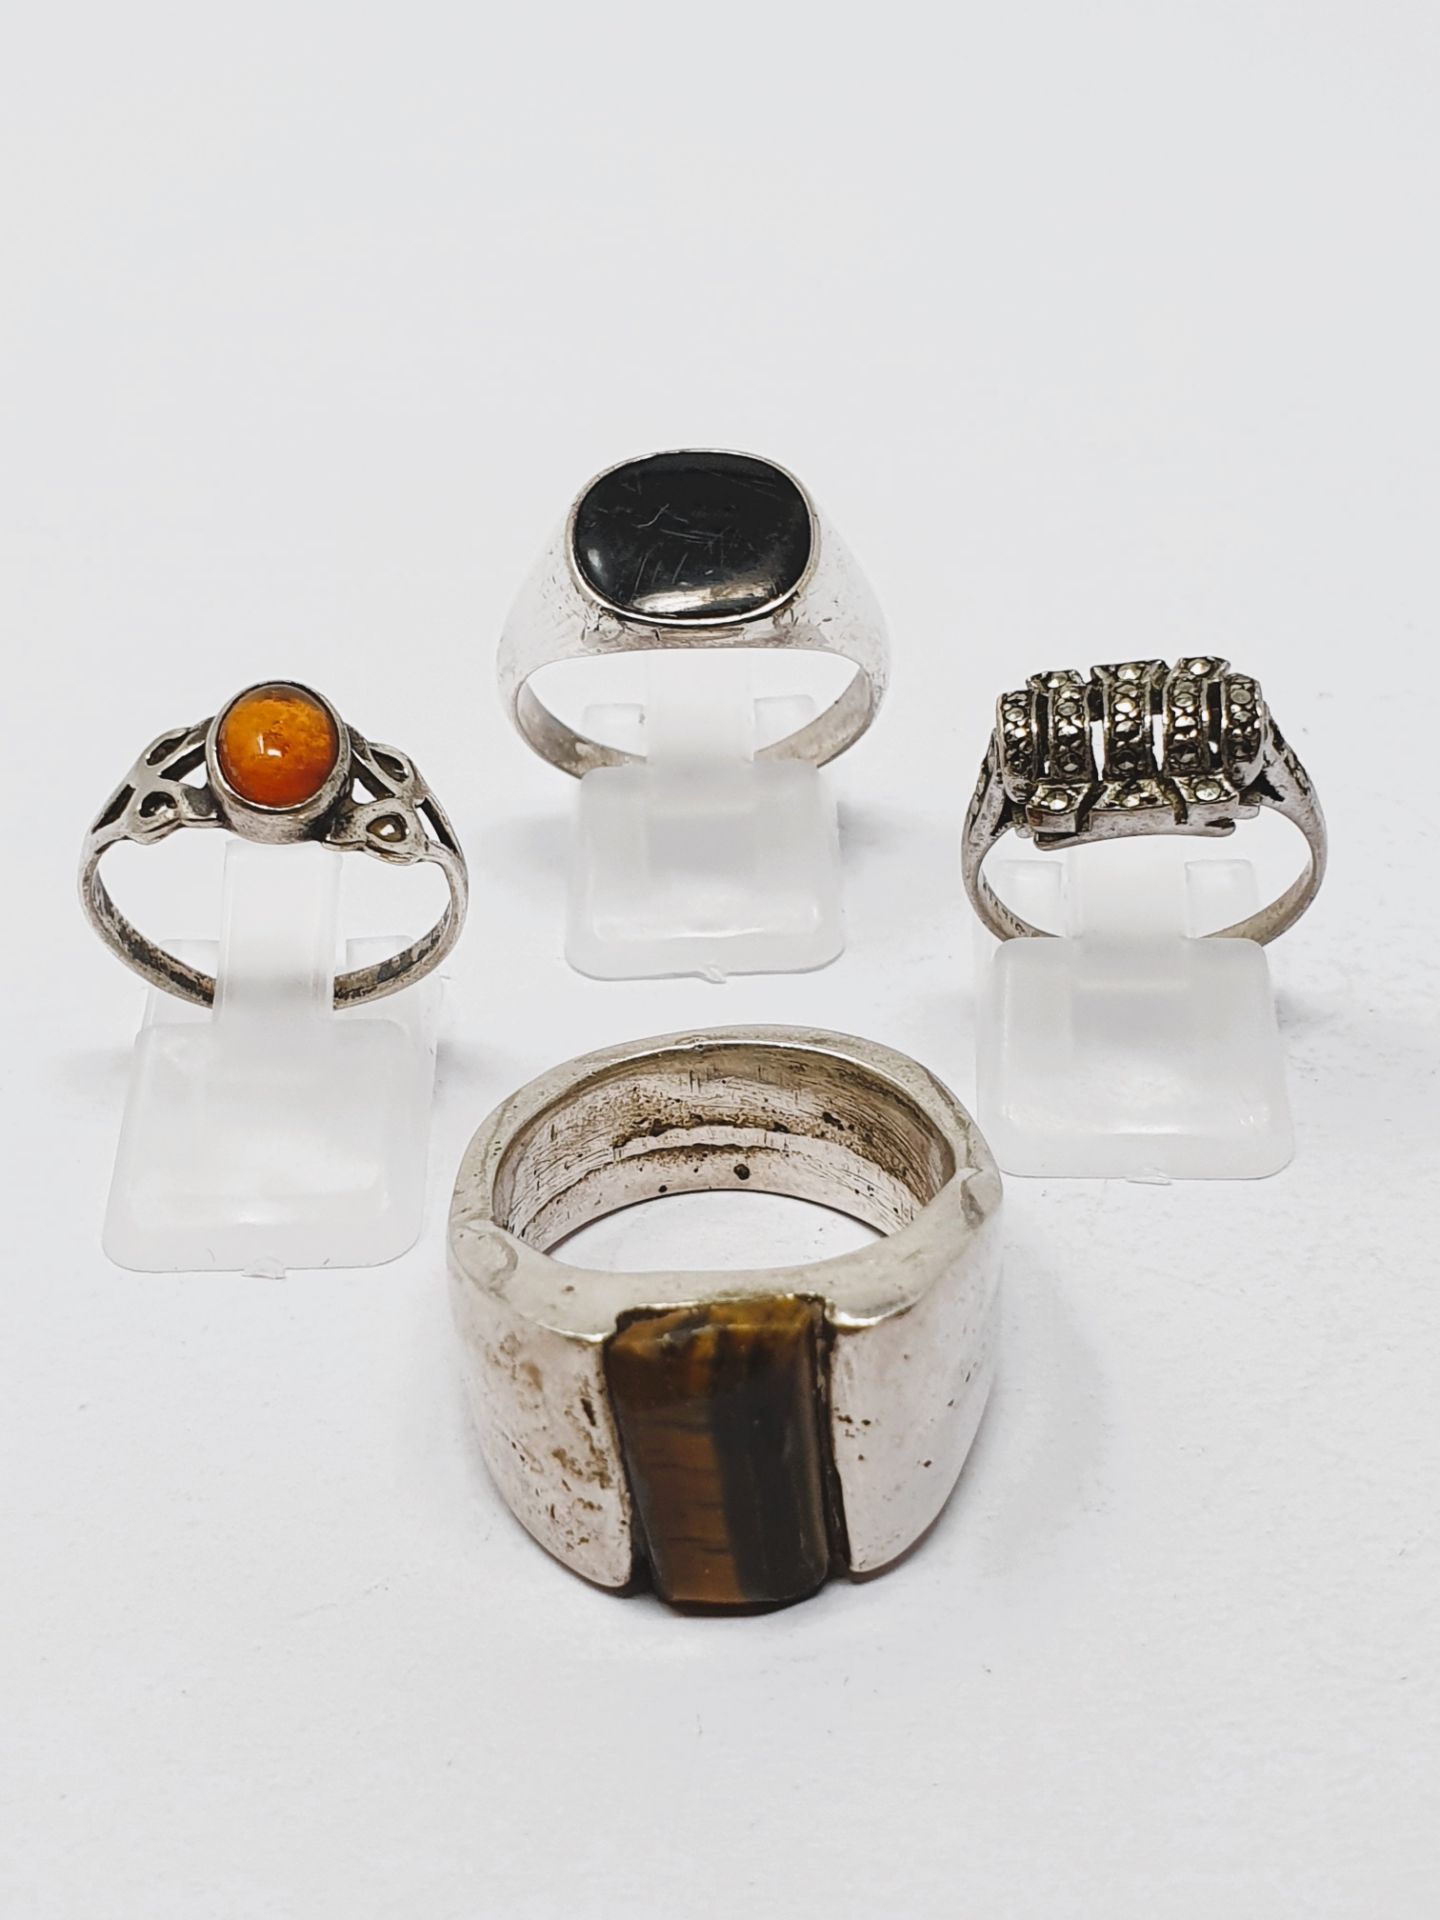 Four sterling silver rings, gross weight 44.